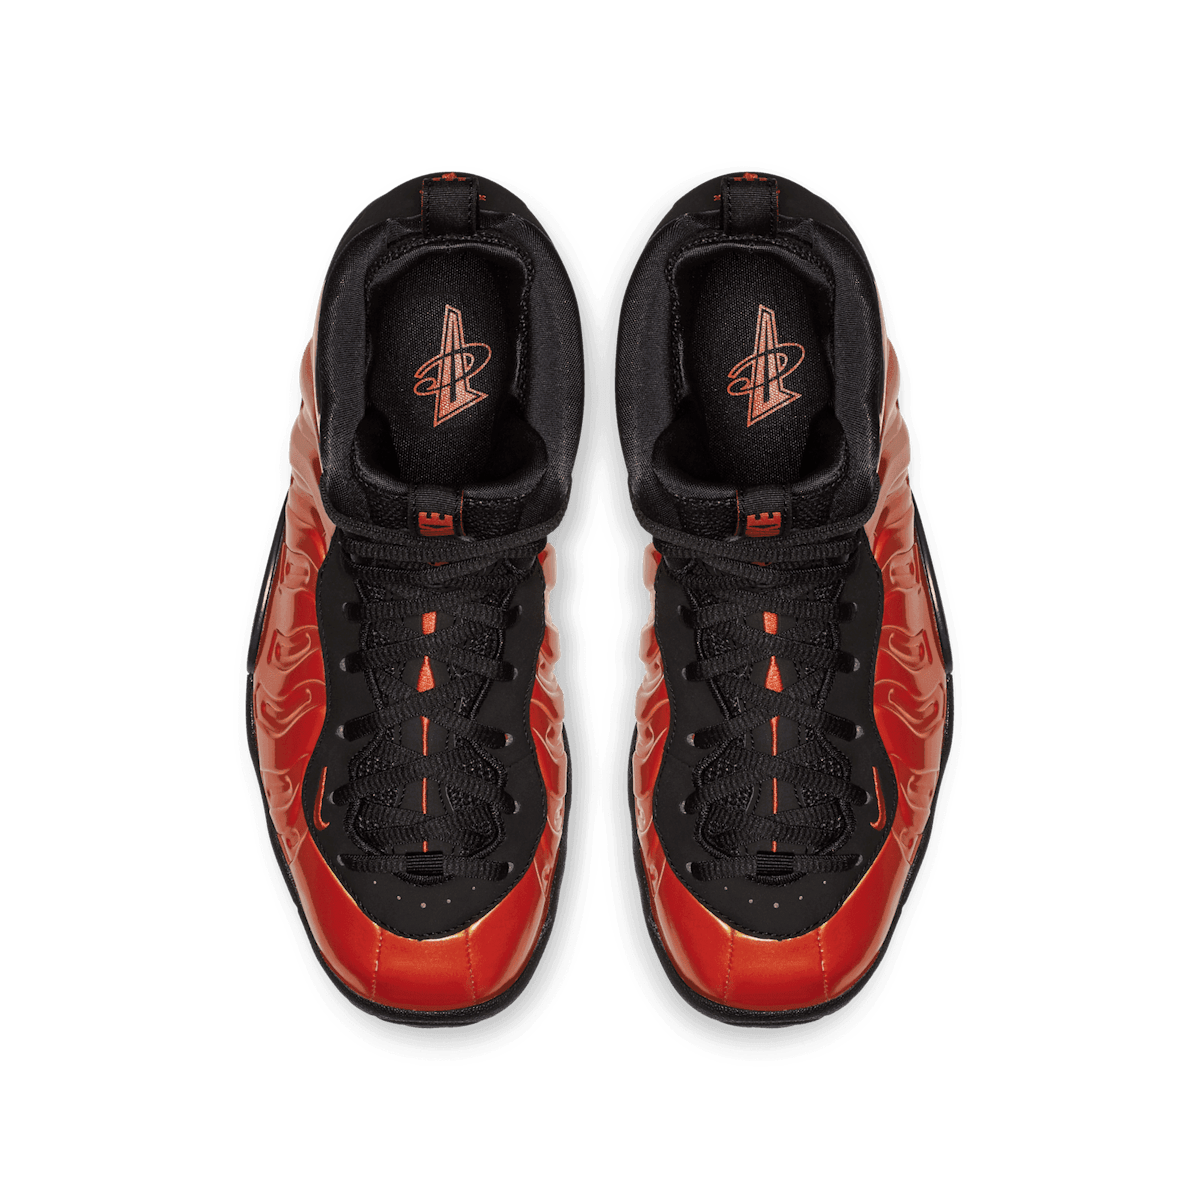 Nike Air Foamposite One Habanero Red (GS) - 644791-603 Raffles and